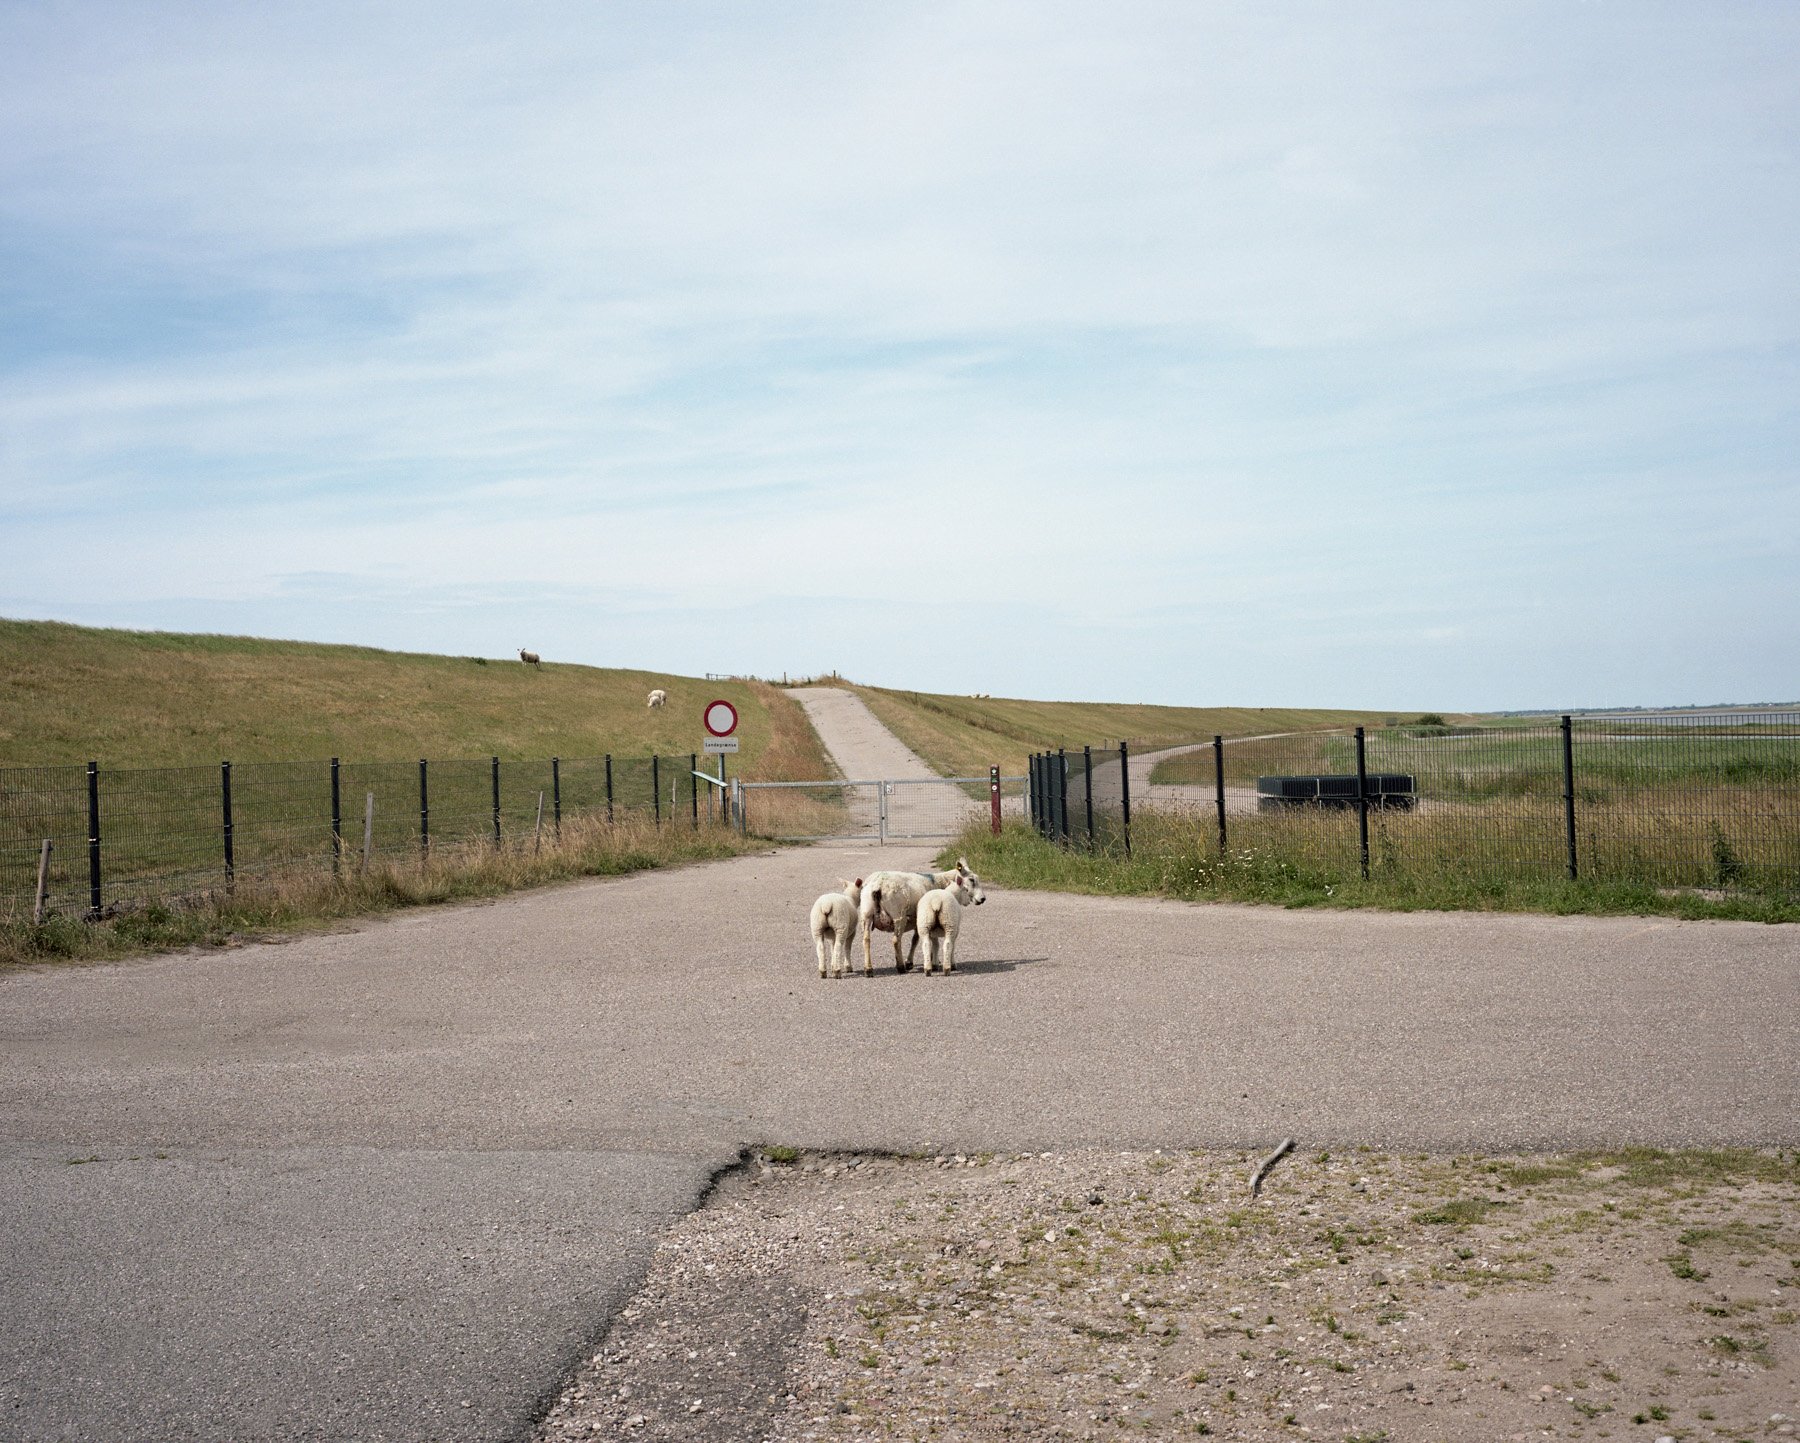  Germany, Rickelbuller Koog. 2019. A view on the border between Germany and Denmark. Dermark built a 70 km fence along its border with Germany to protect its pigs from disease-carrying wild boar coming from Germany. Export in Denmark’s pork industry 